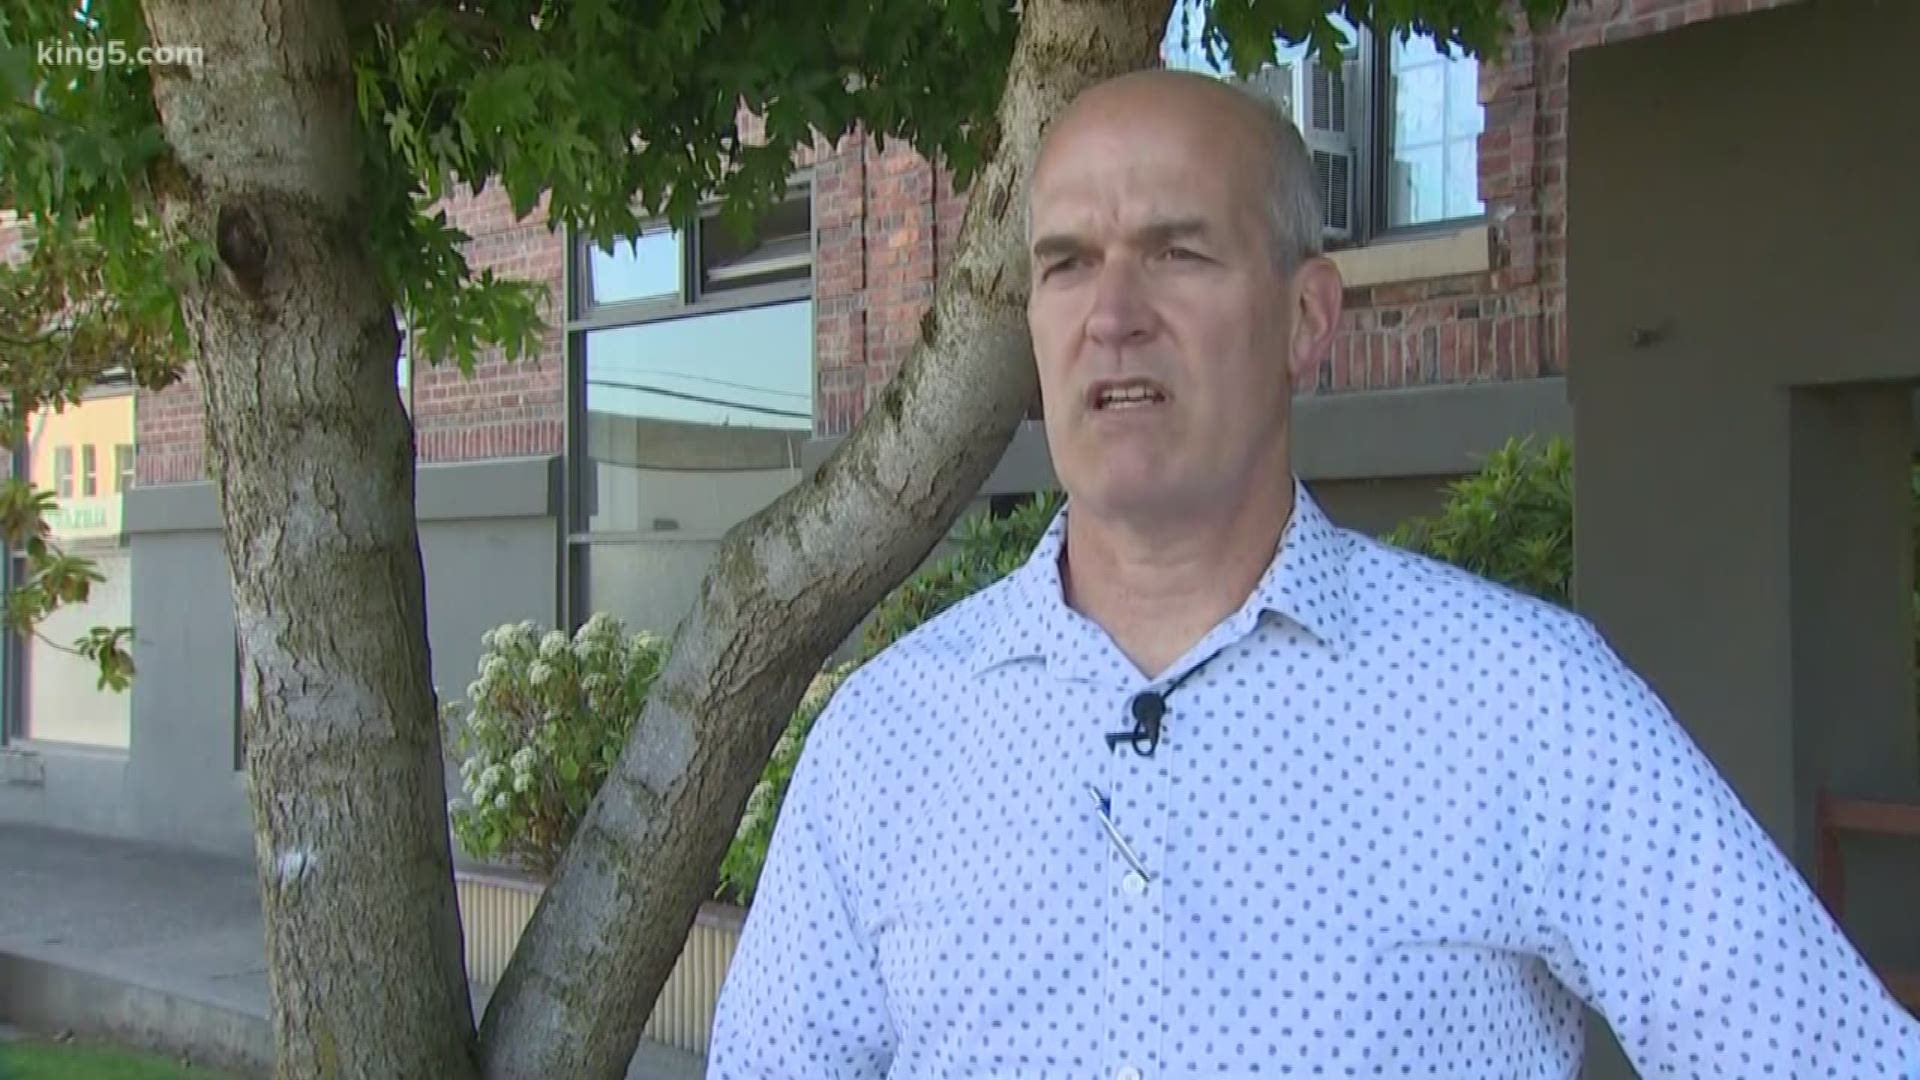 All Democratic Washington representatives are on board with impeaching President Donald Trump or launching an impeachment inquiry. Rep. Rick Larsen explains.